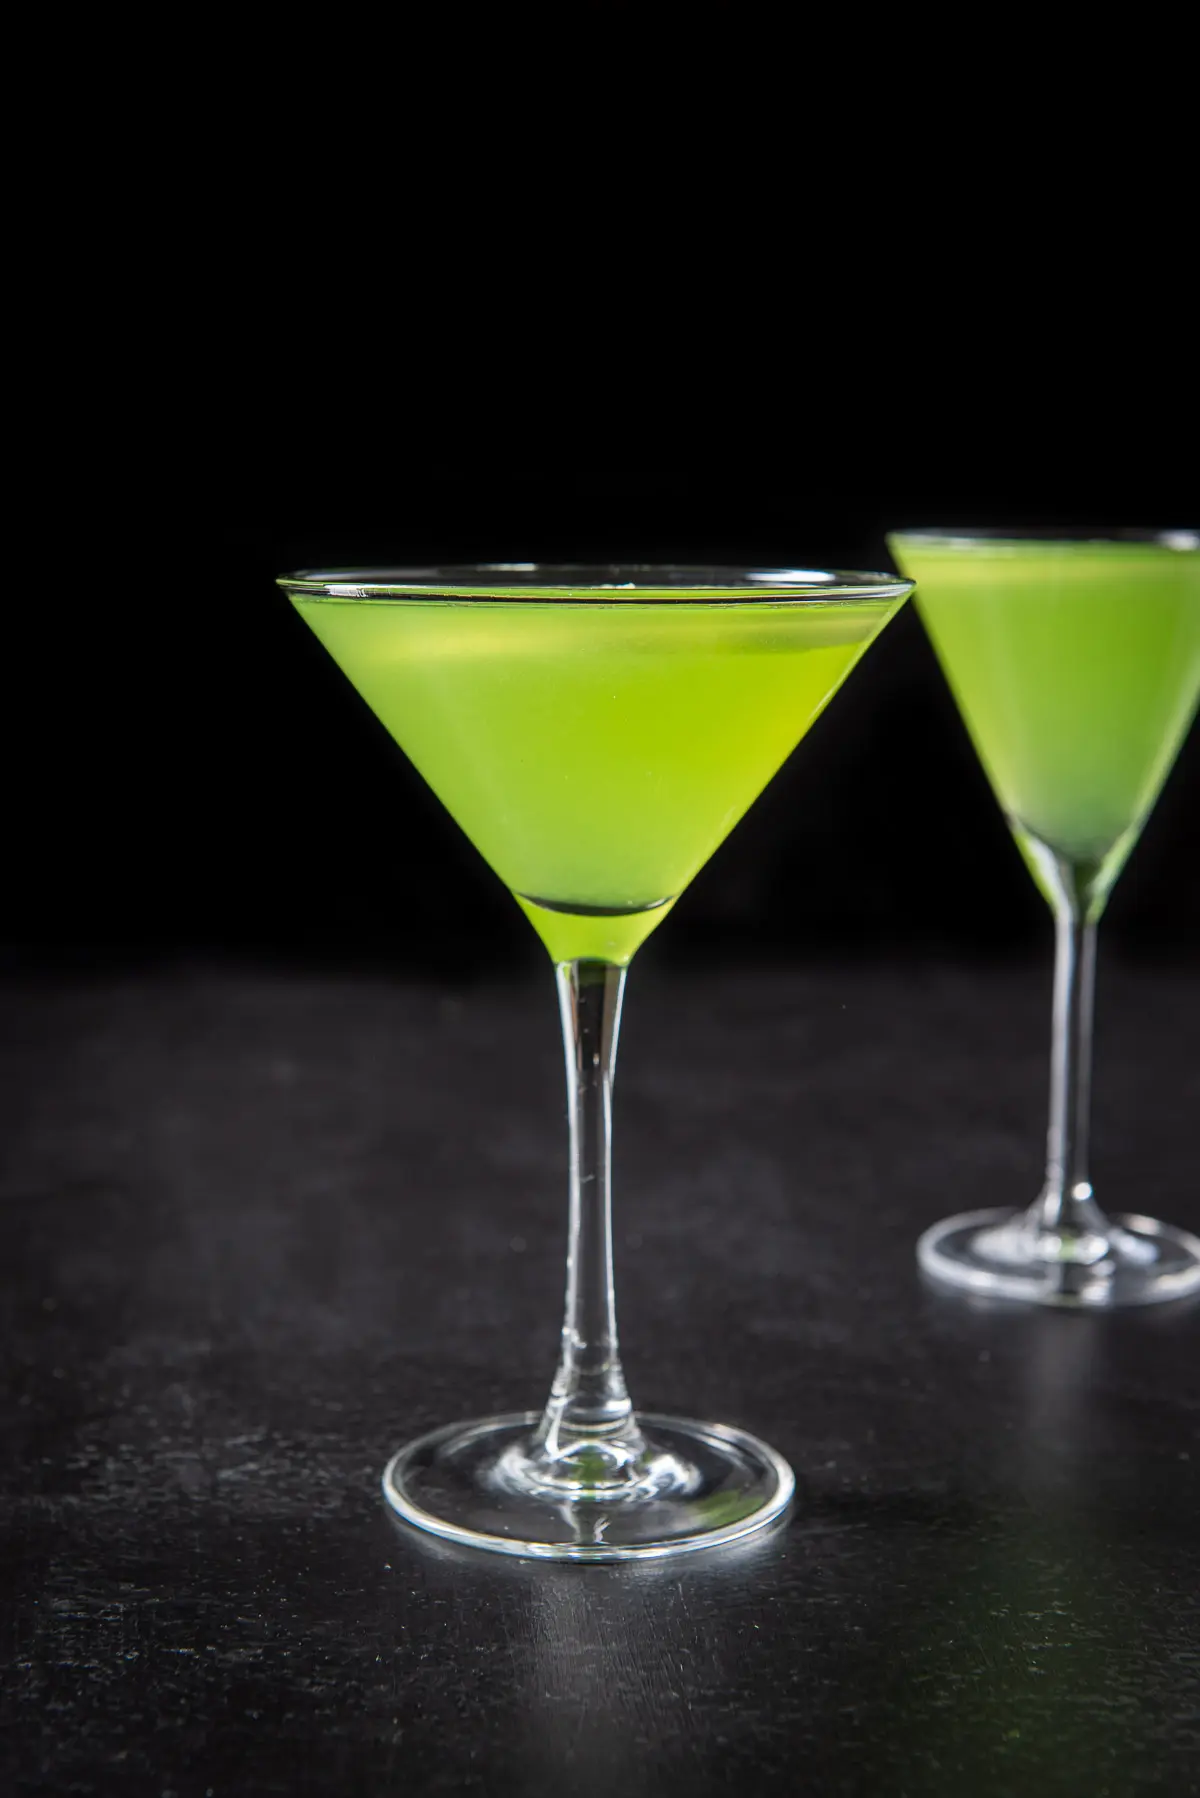 Vertical view of the green cocktail in the classic martini glass